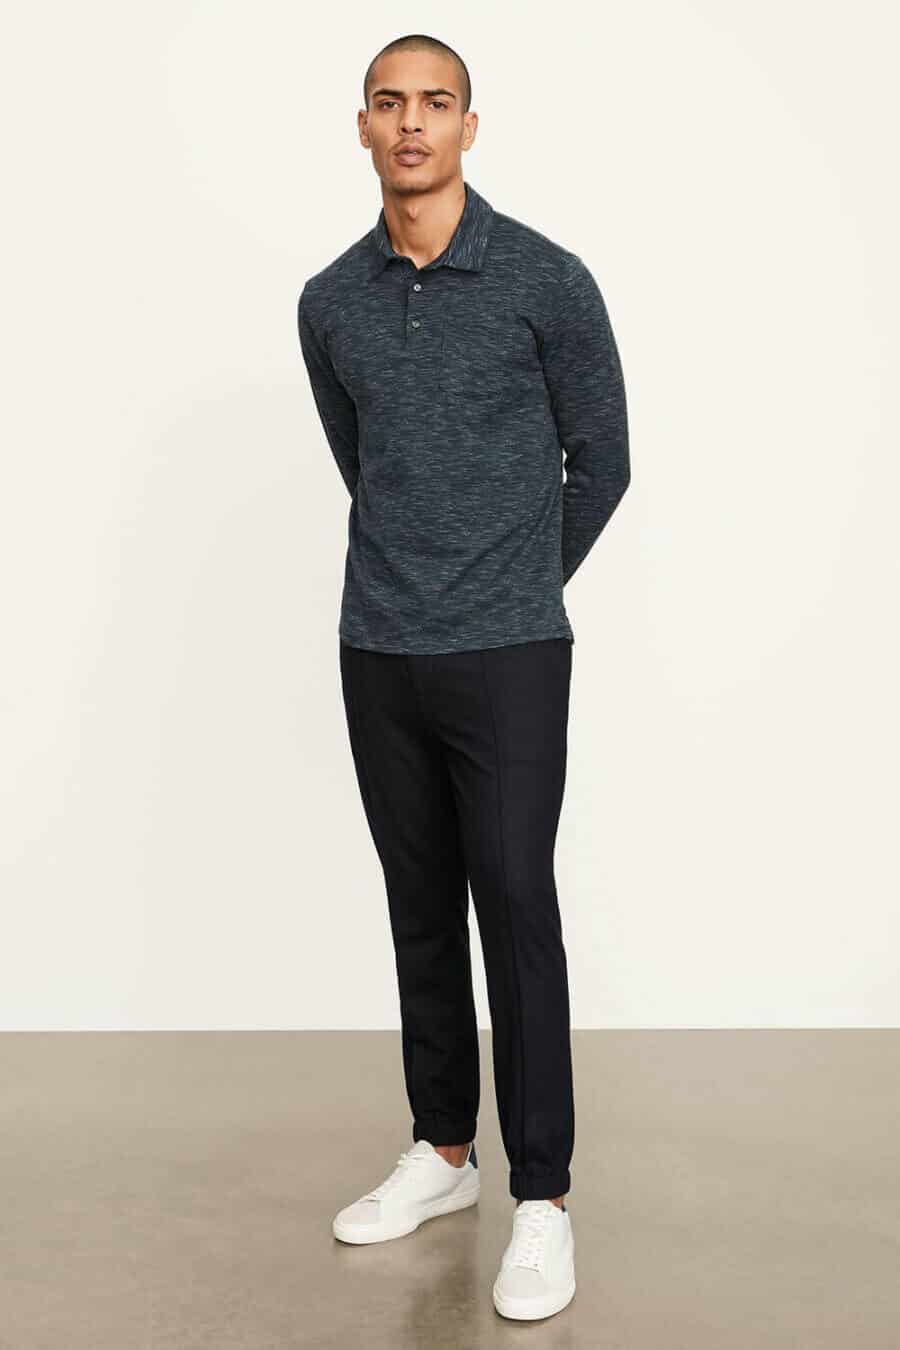 Men's long sleeve polo shirt, dark chinos and white sneakers outfit